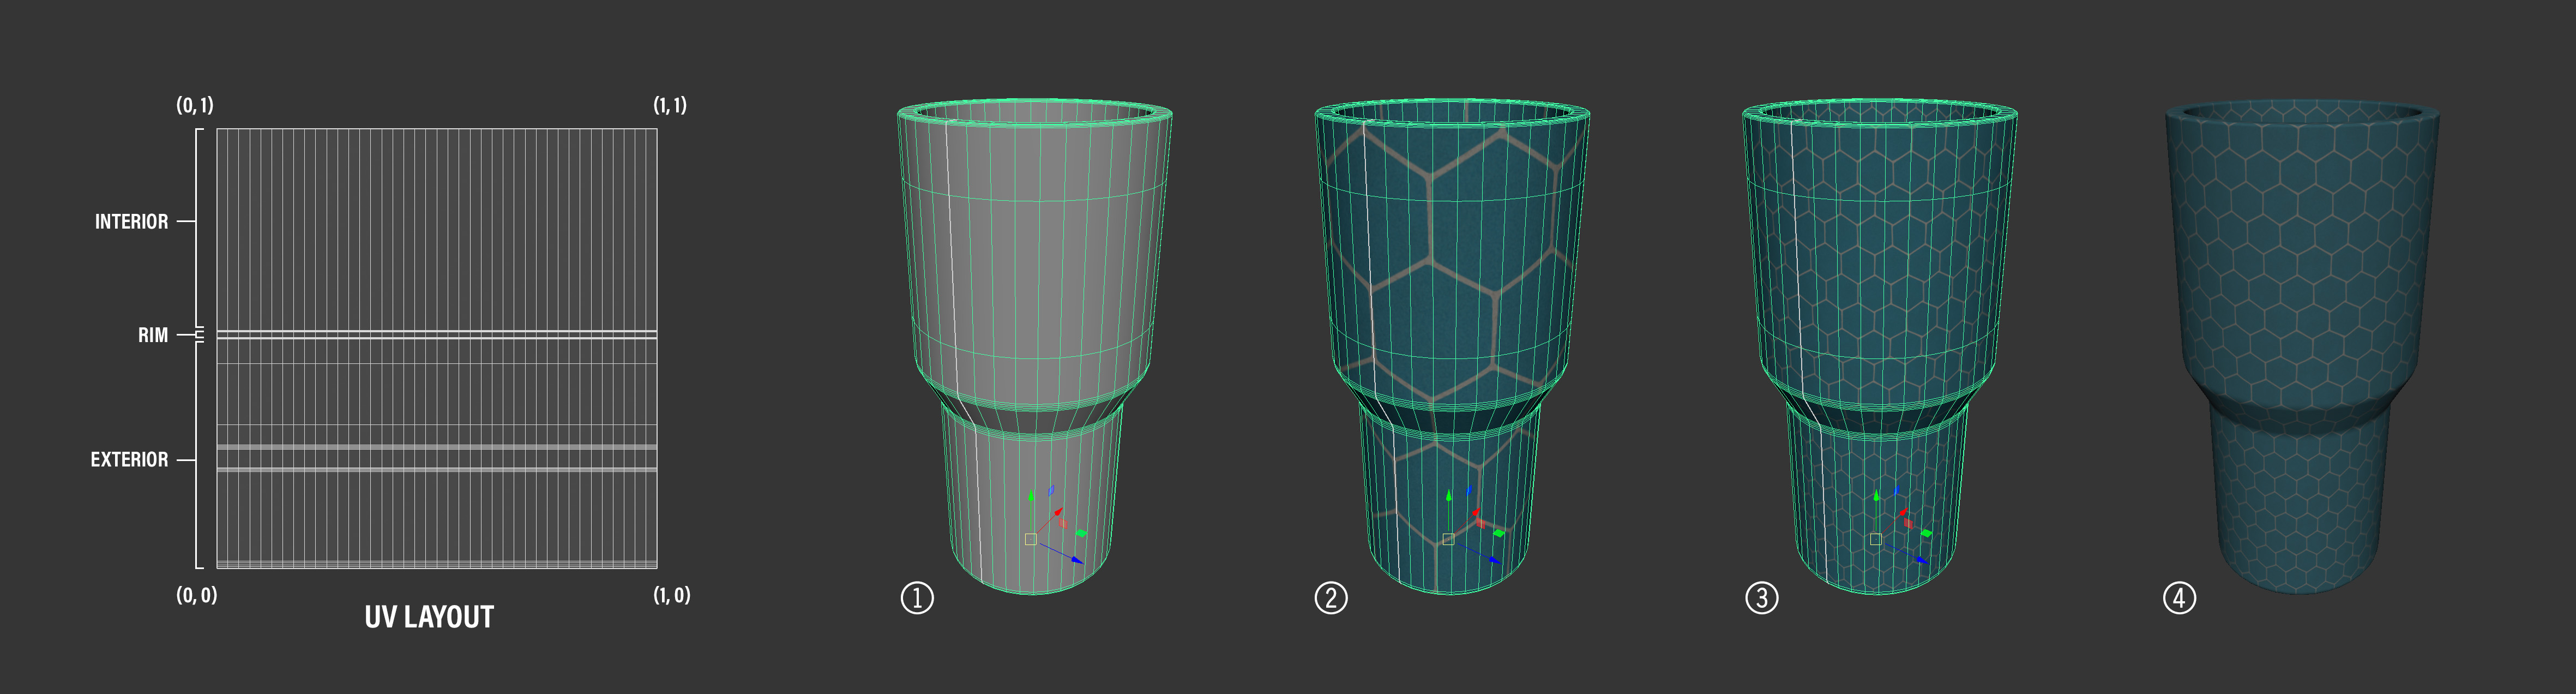 A 3D tumbler asset with the UV layout encompassing the entire 0 to 1 space and four variations. The first is just the mesh and wireframe, the second is mesh and wireframe with the tiling image applied to the tumbler with large hexagons, the third is mesh and wireframe with a the texture tiling more and smaller hexagons and the fourth is the mesh with no wireframes illustrating the smaller hexagon tiling texture